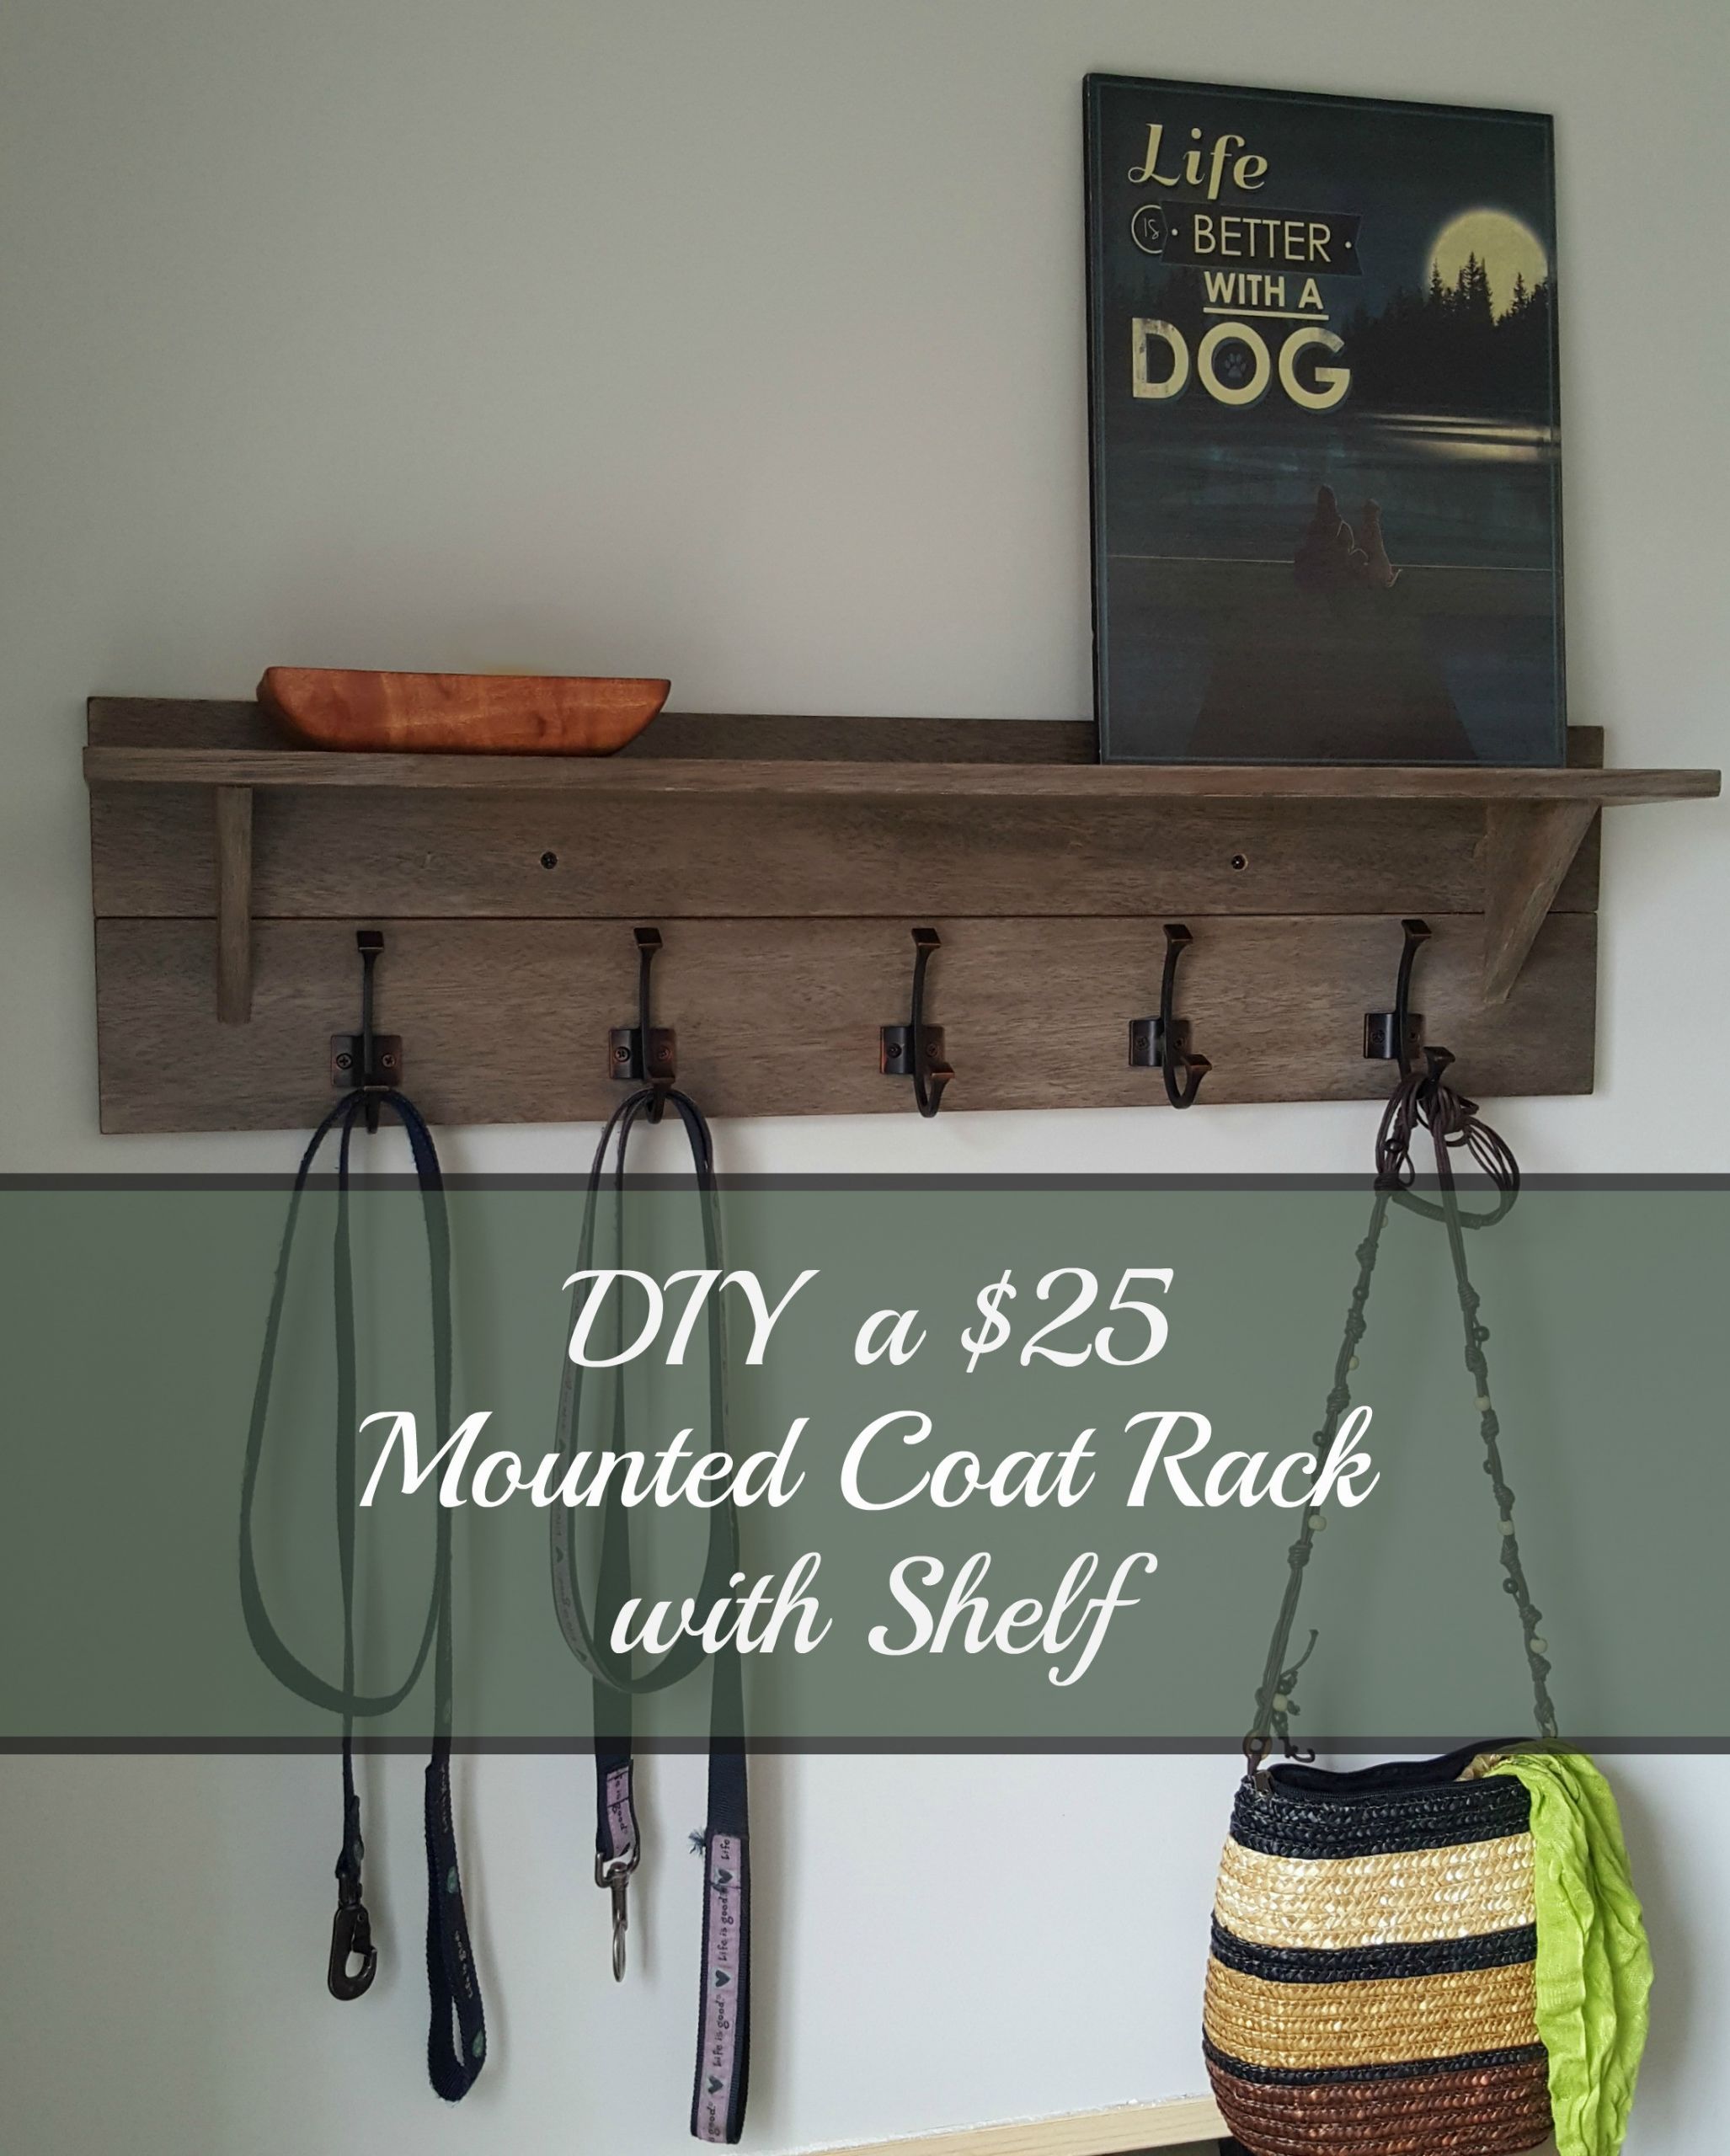 Coat Rack DIY
 Turtles and Tails Wall mounted Coatrack with Shelf DIY